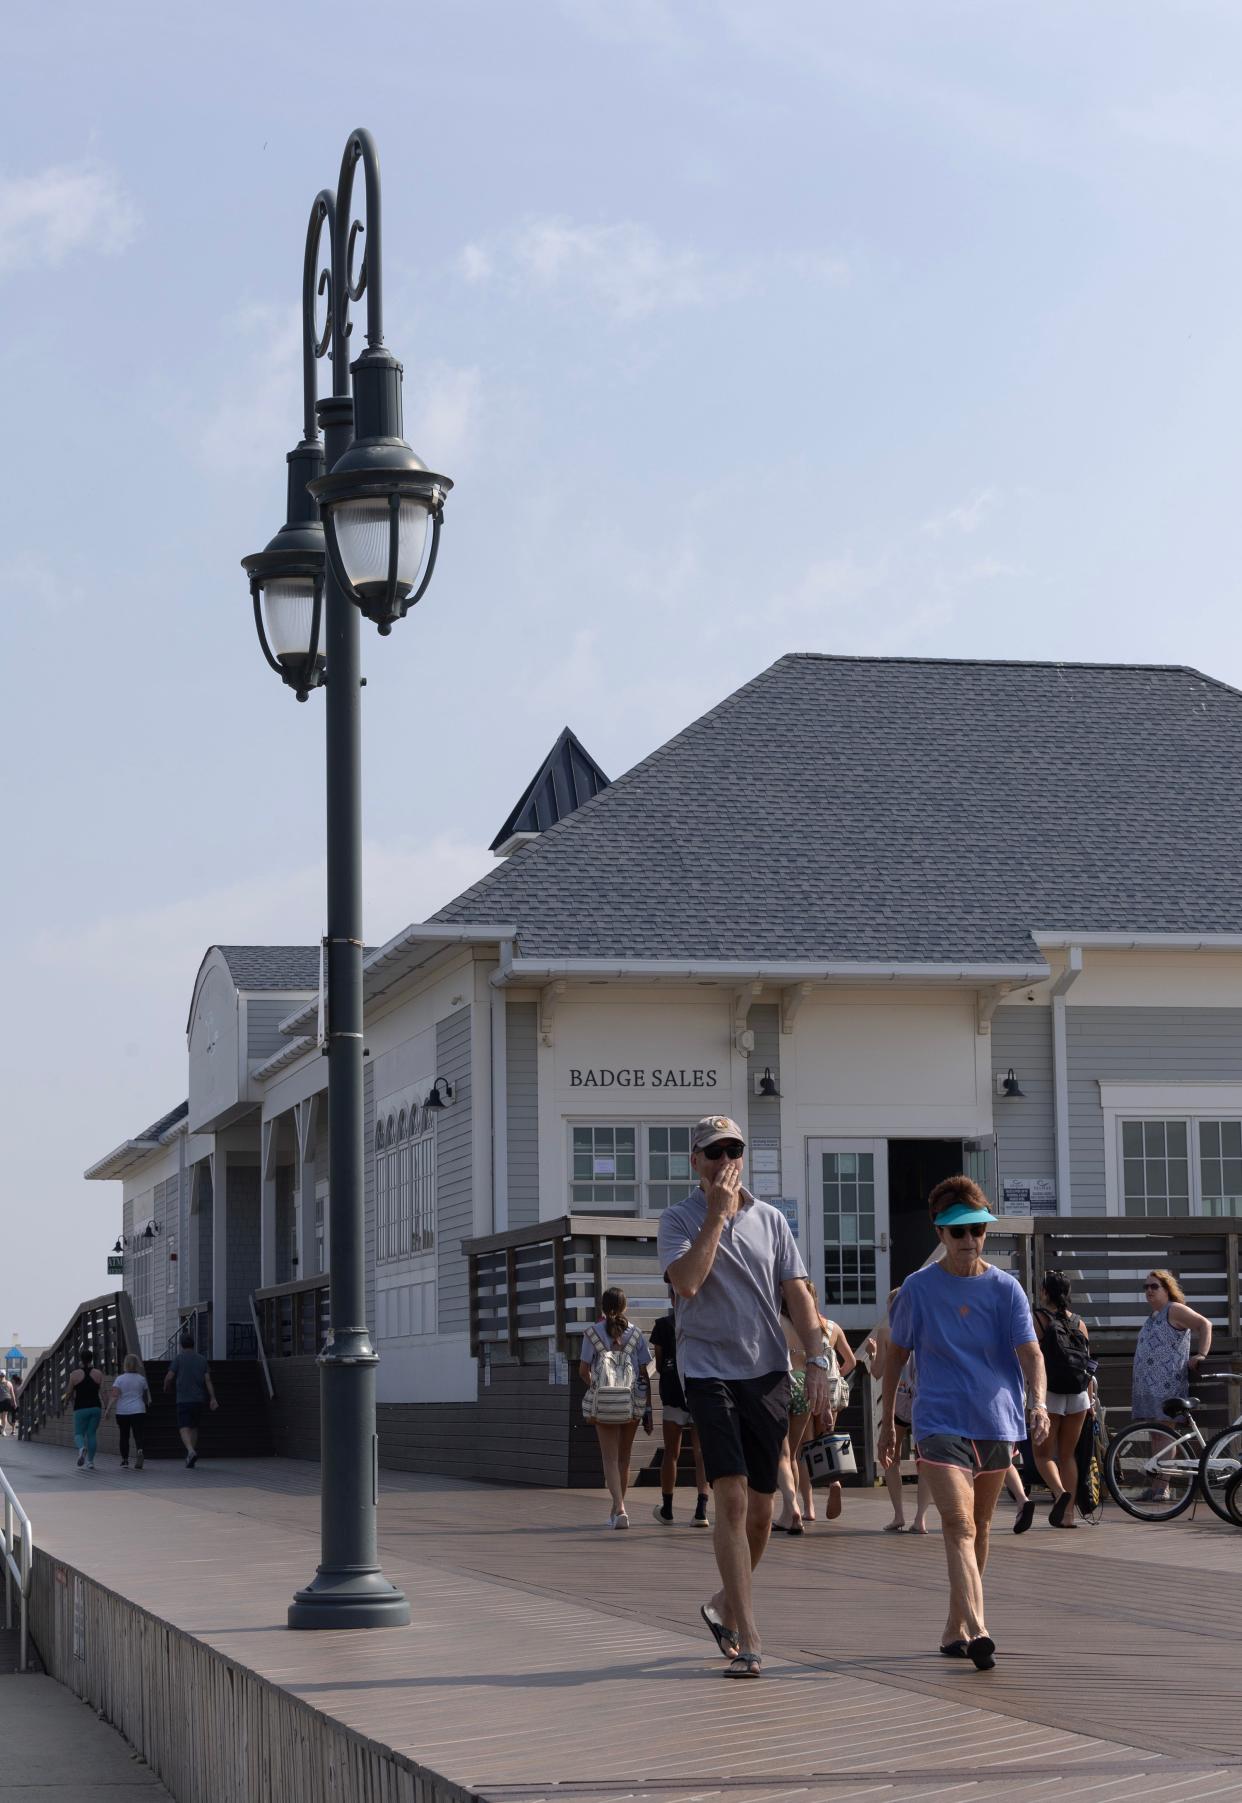 Belmar is at "war" with Verizon, according to the mayor, over Verizon's attempt to put 20 40-foot tall cell poles or towers along Ocean Avenue up against the boardwalk. They will be interspersed among the decorative lights now on the boardwalk.